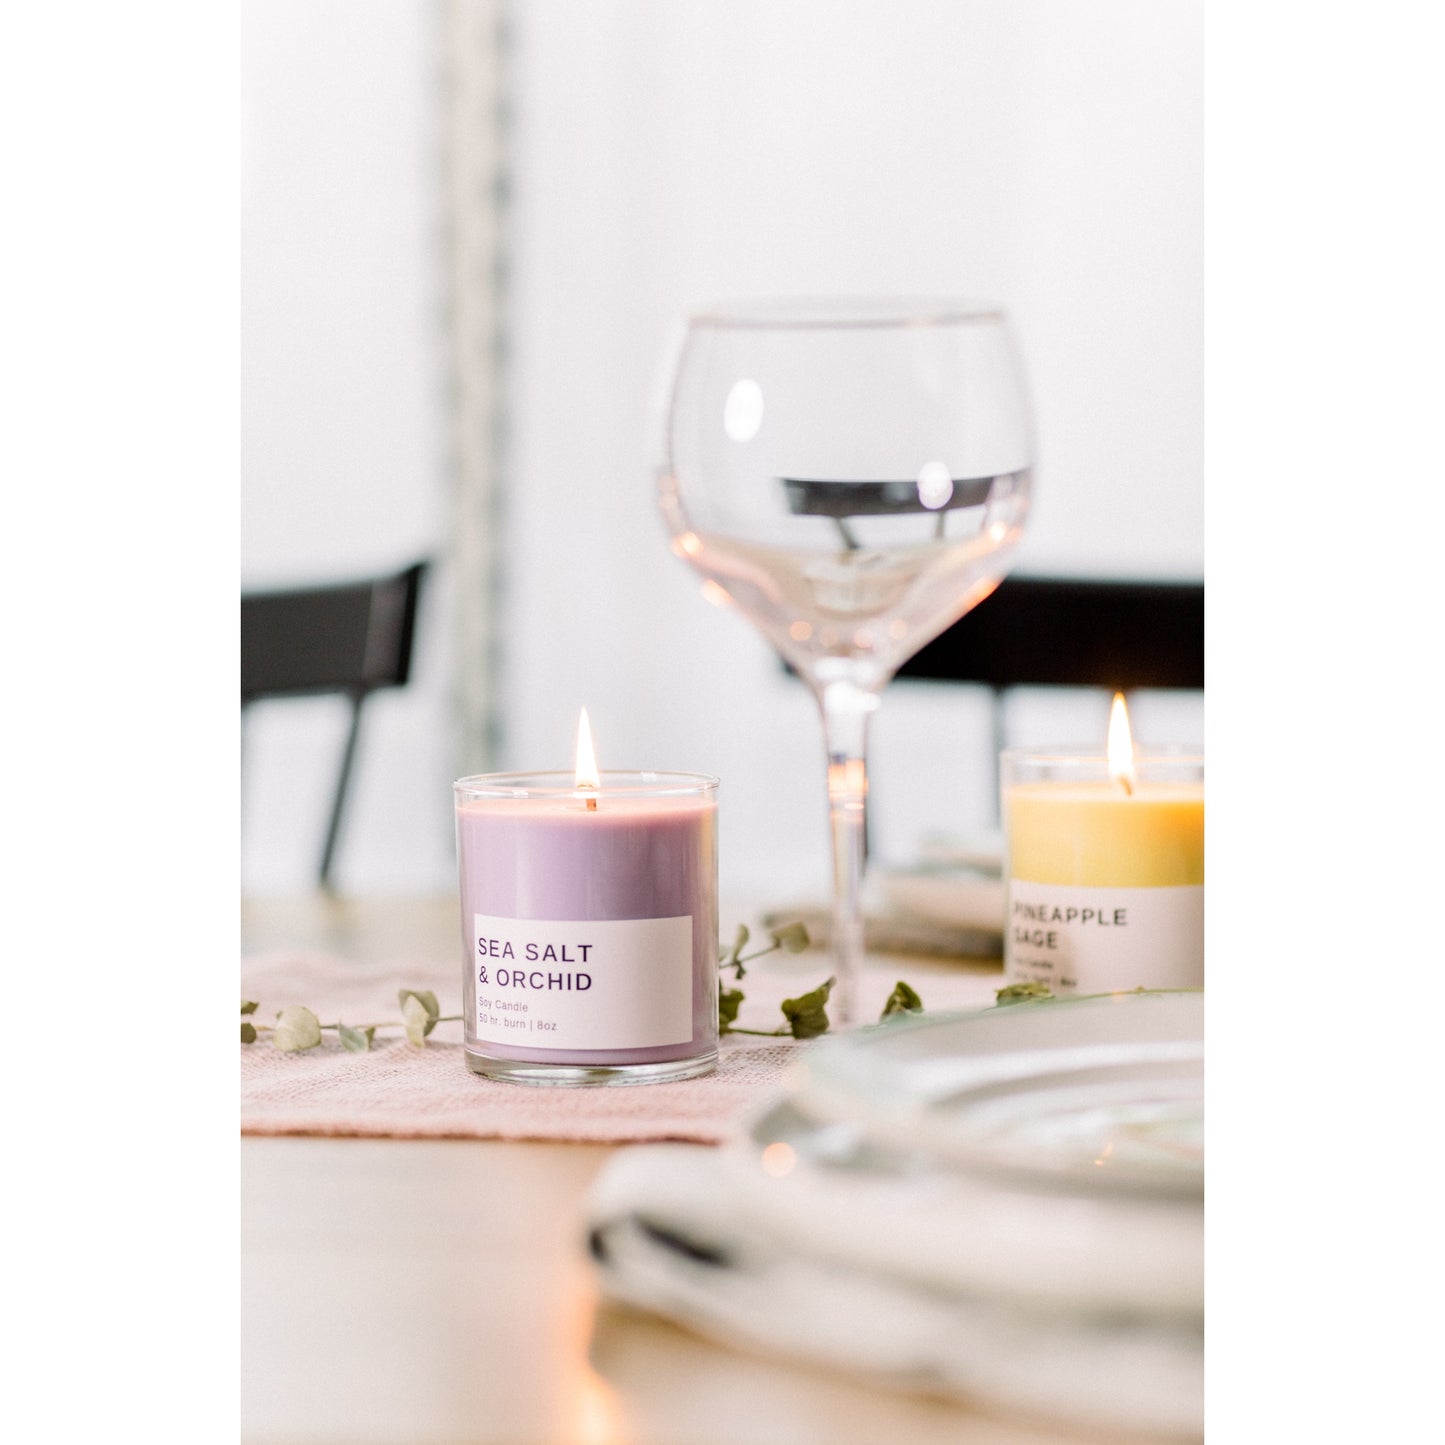 Sea Salt & Orchid Pastel Soy Candle